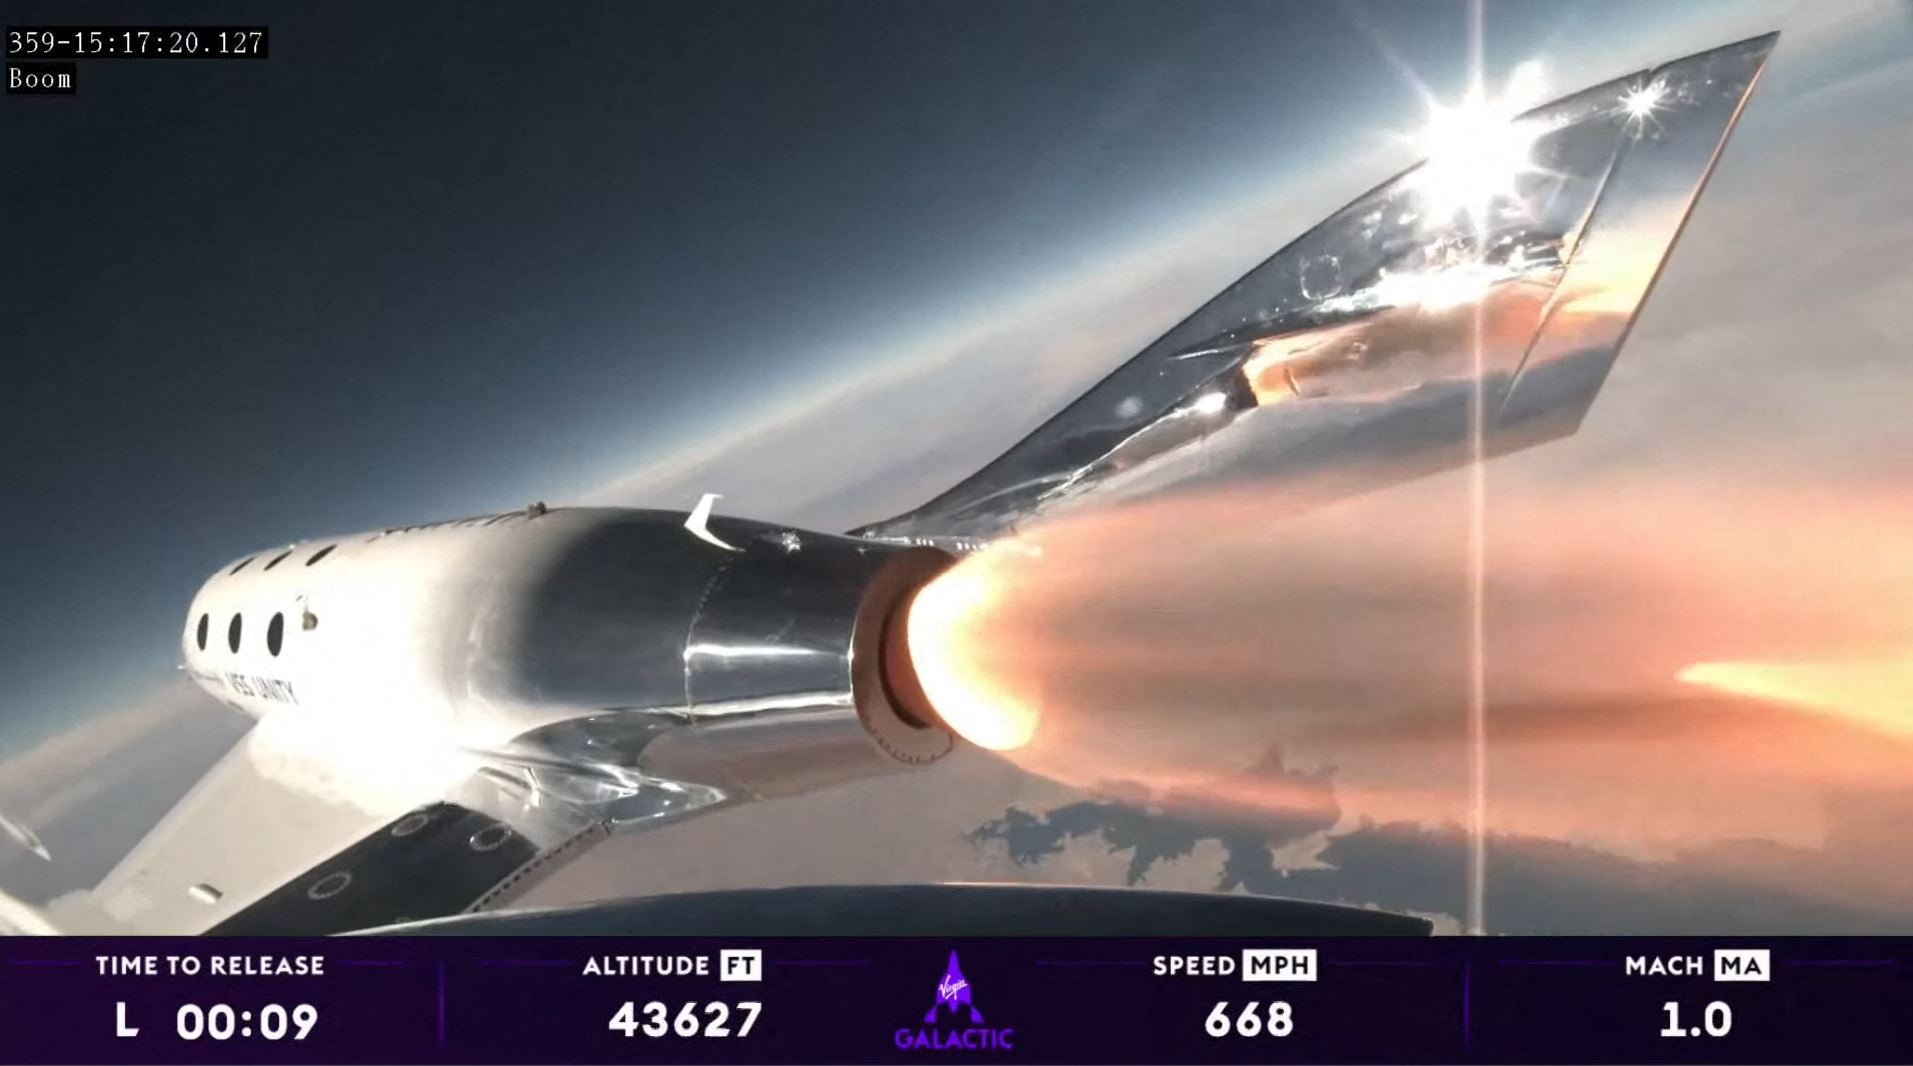 The aircraft hit a speed topping an incredible 2,000mph